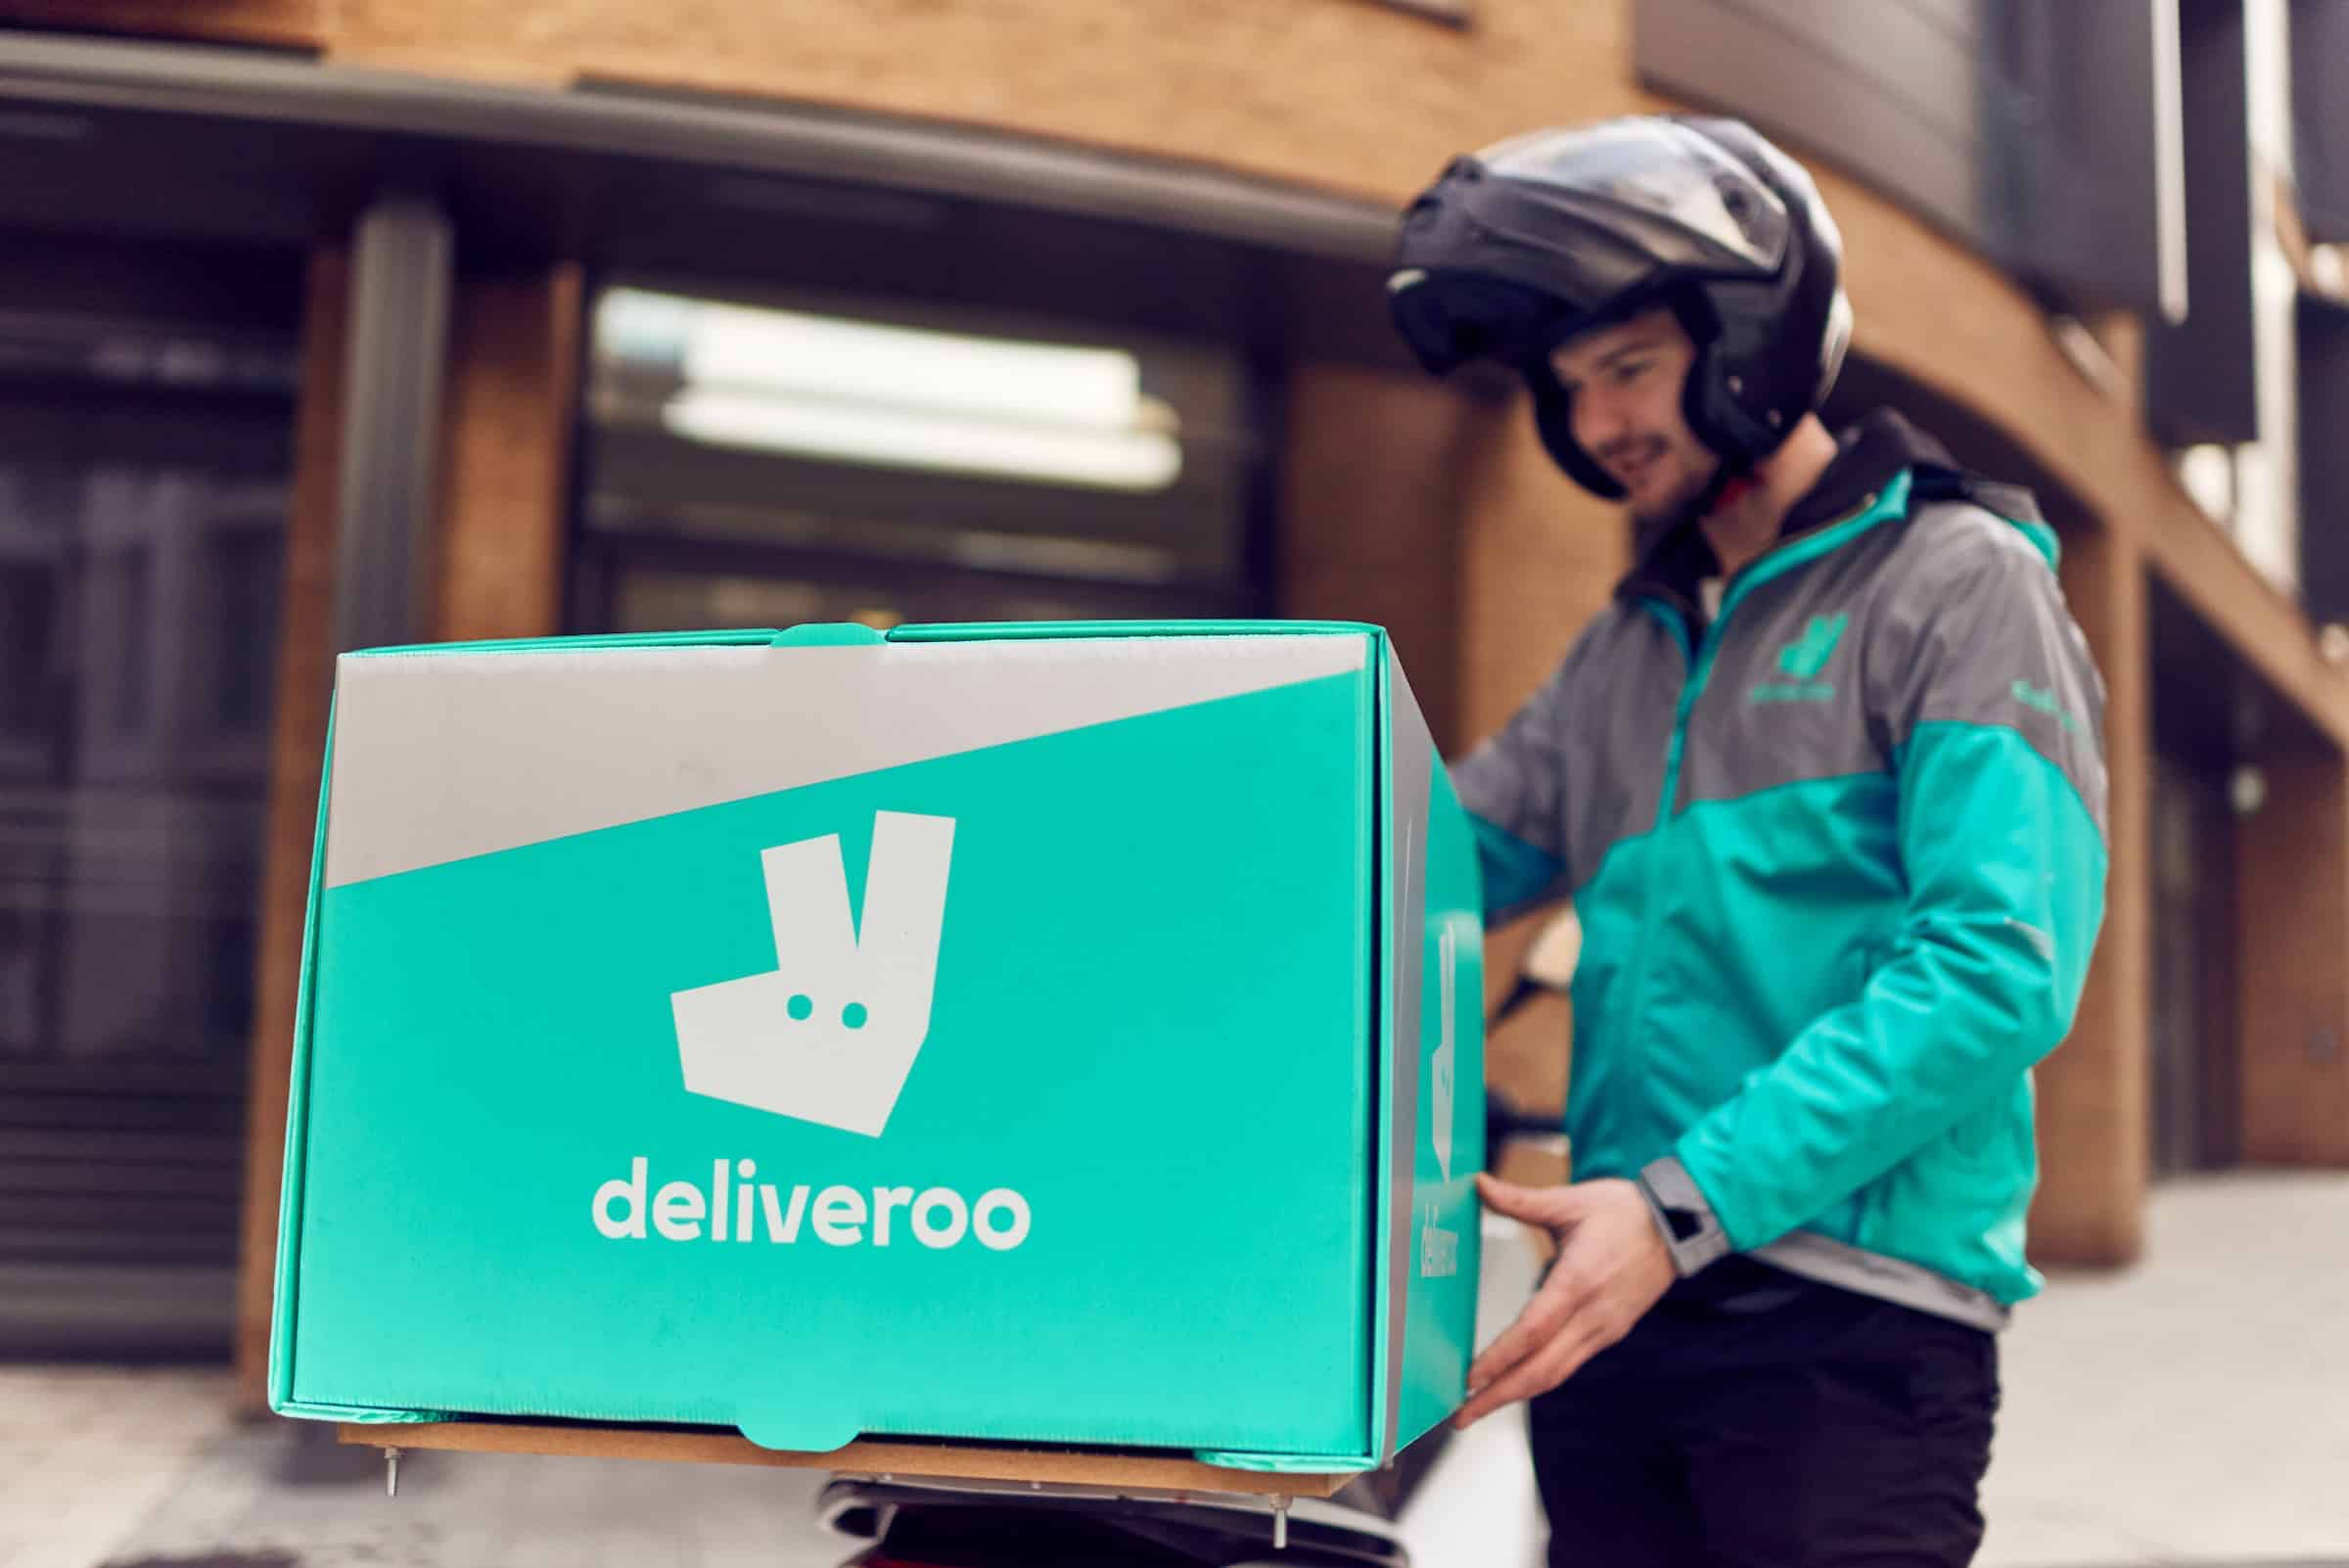 Amazon and Deliveroo tie-up faces probe over competition concerns